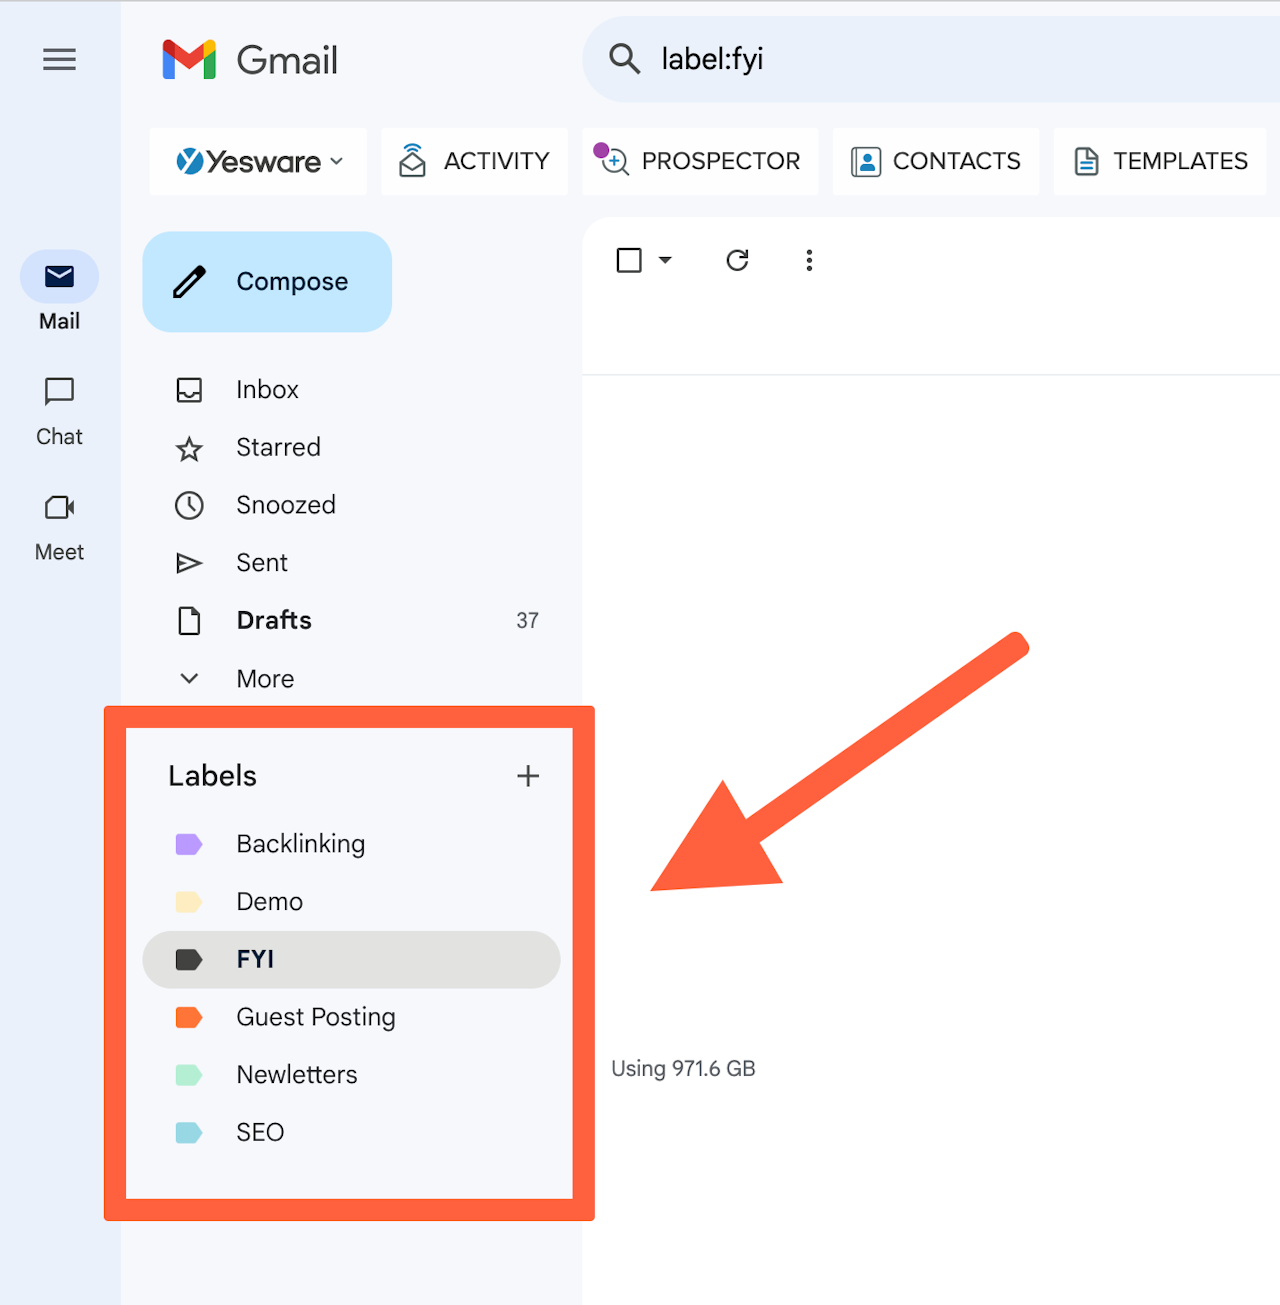 email inbox management: folders and labels in Gmail